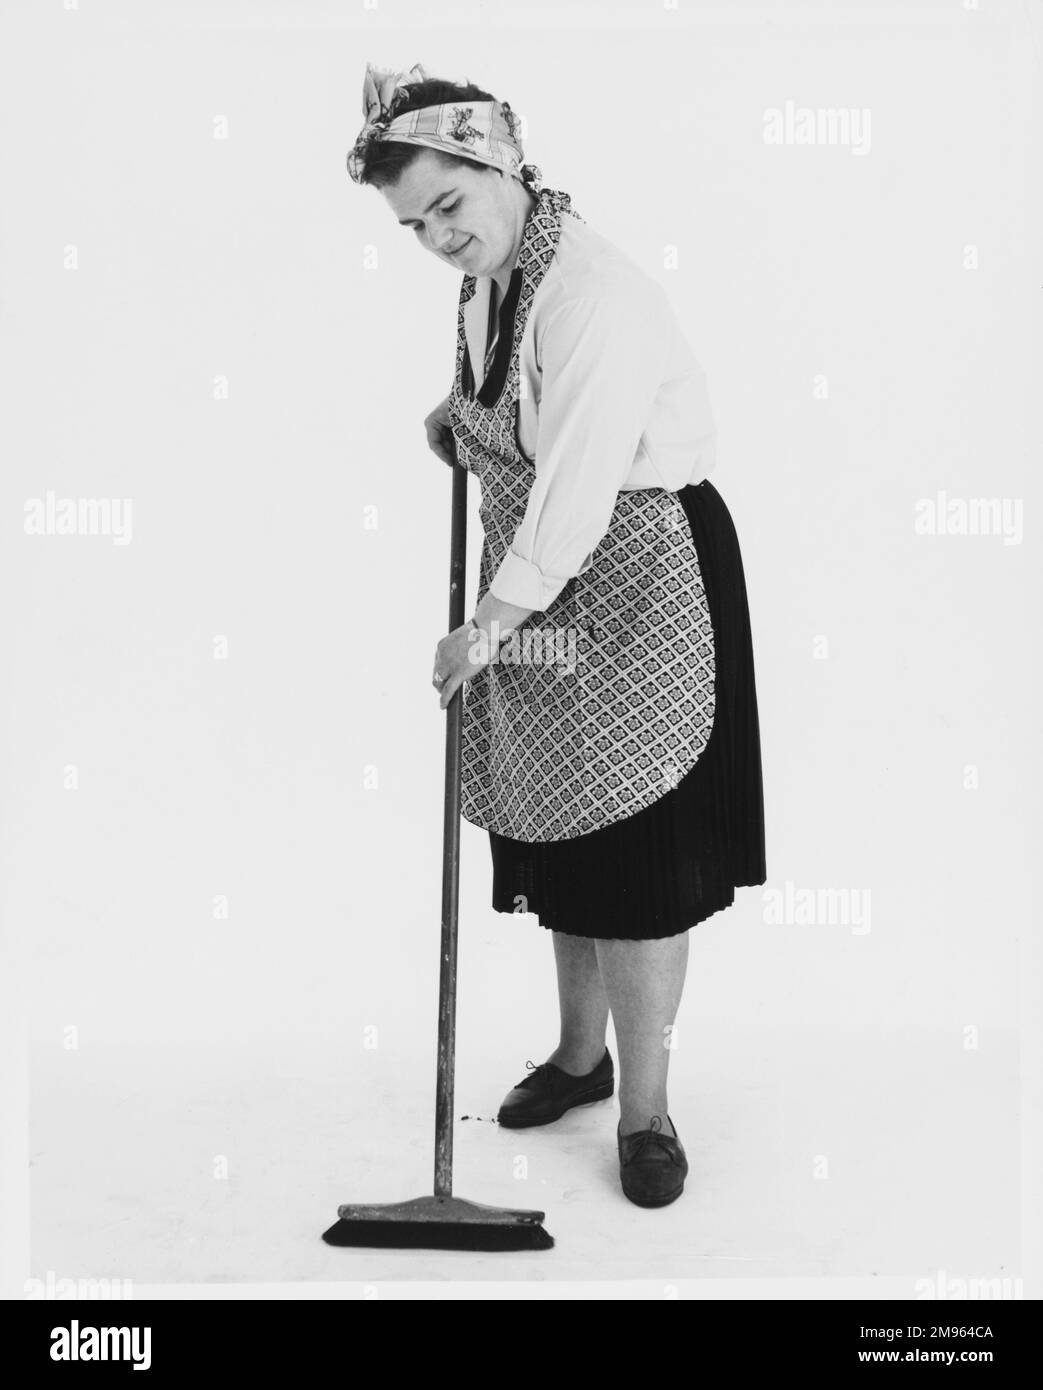 A stereotypical cleaner sweeping the floor. Stock Photo